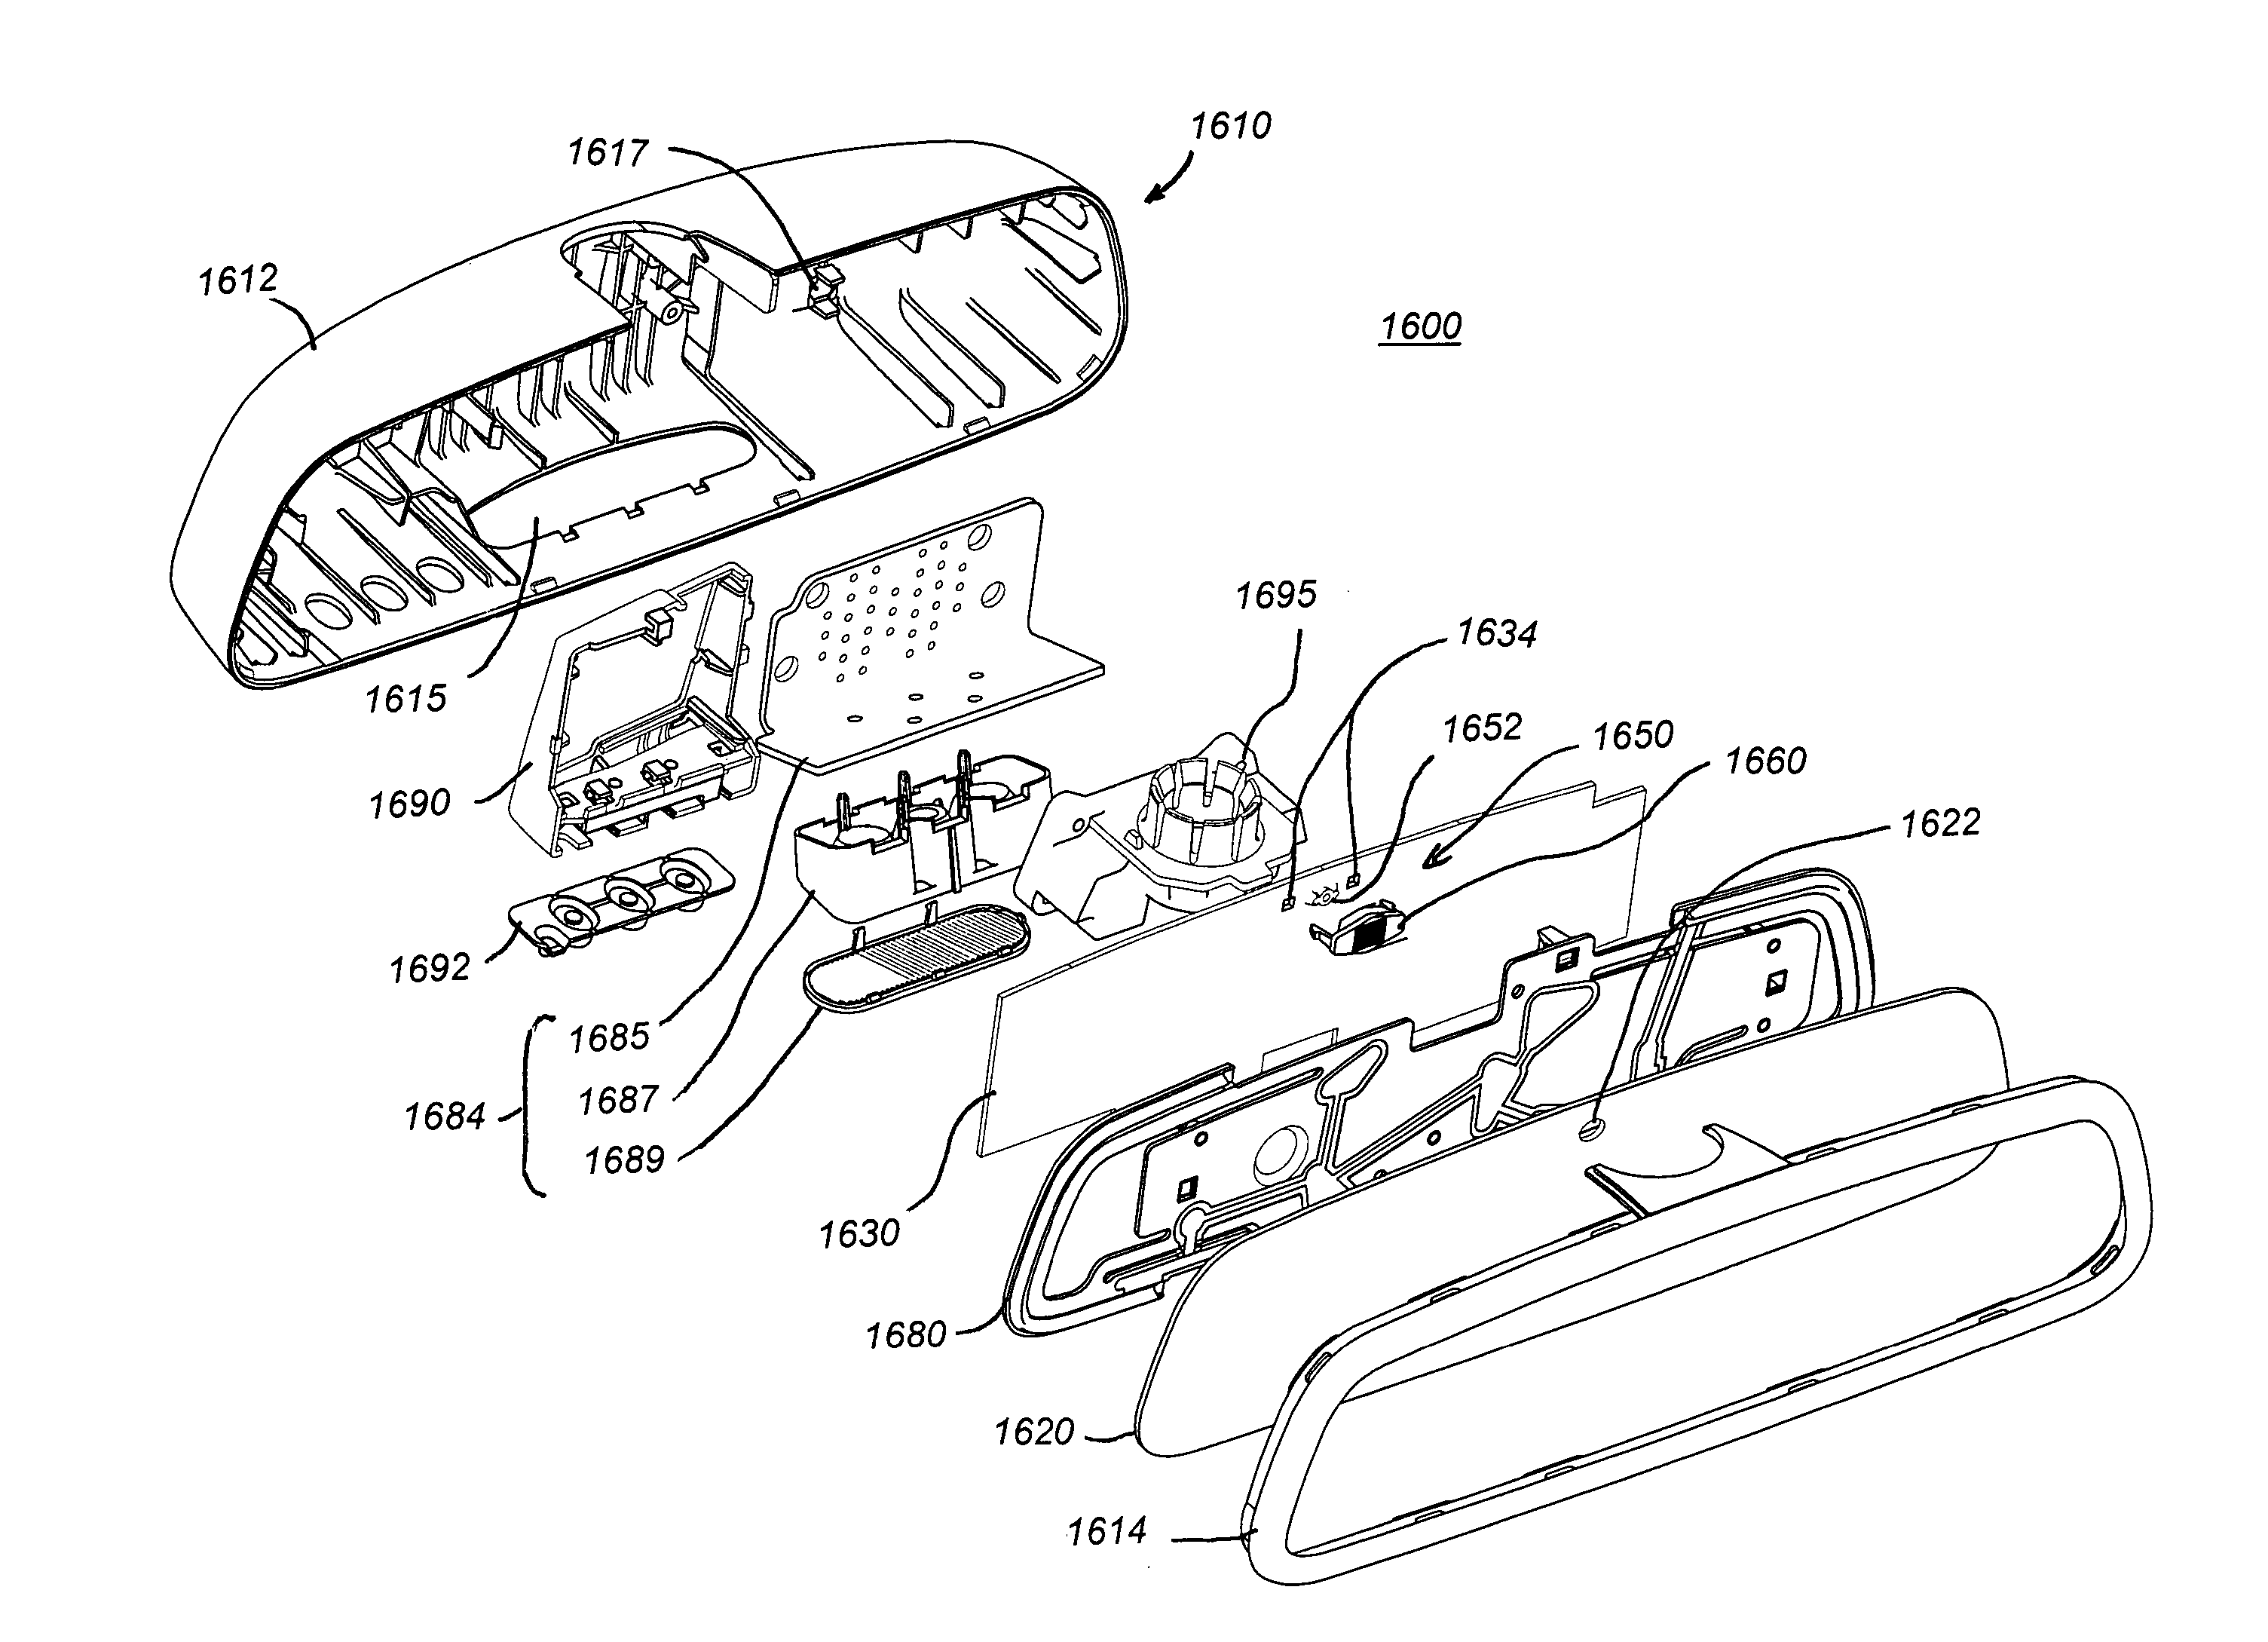 Dimmable rearview assembly having a glare sensor